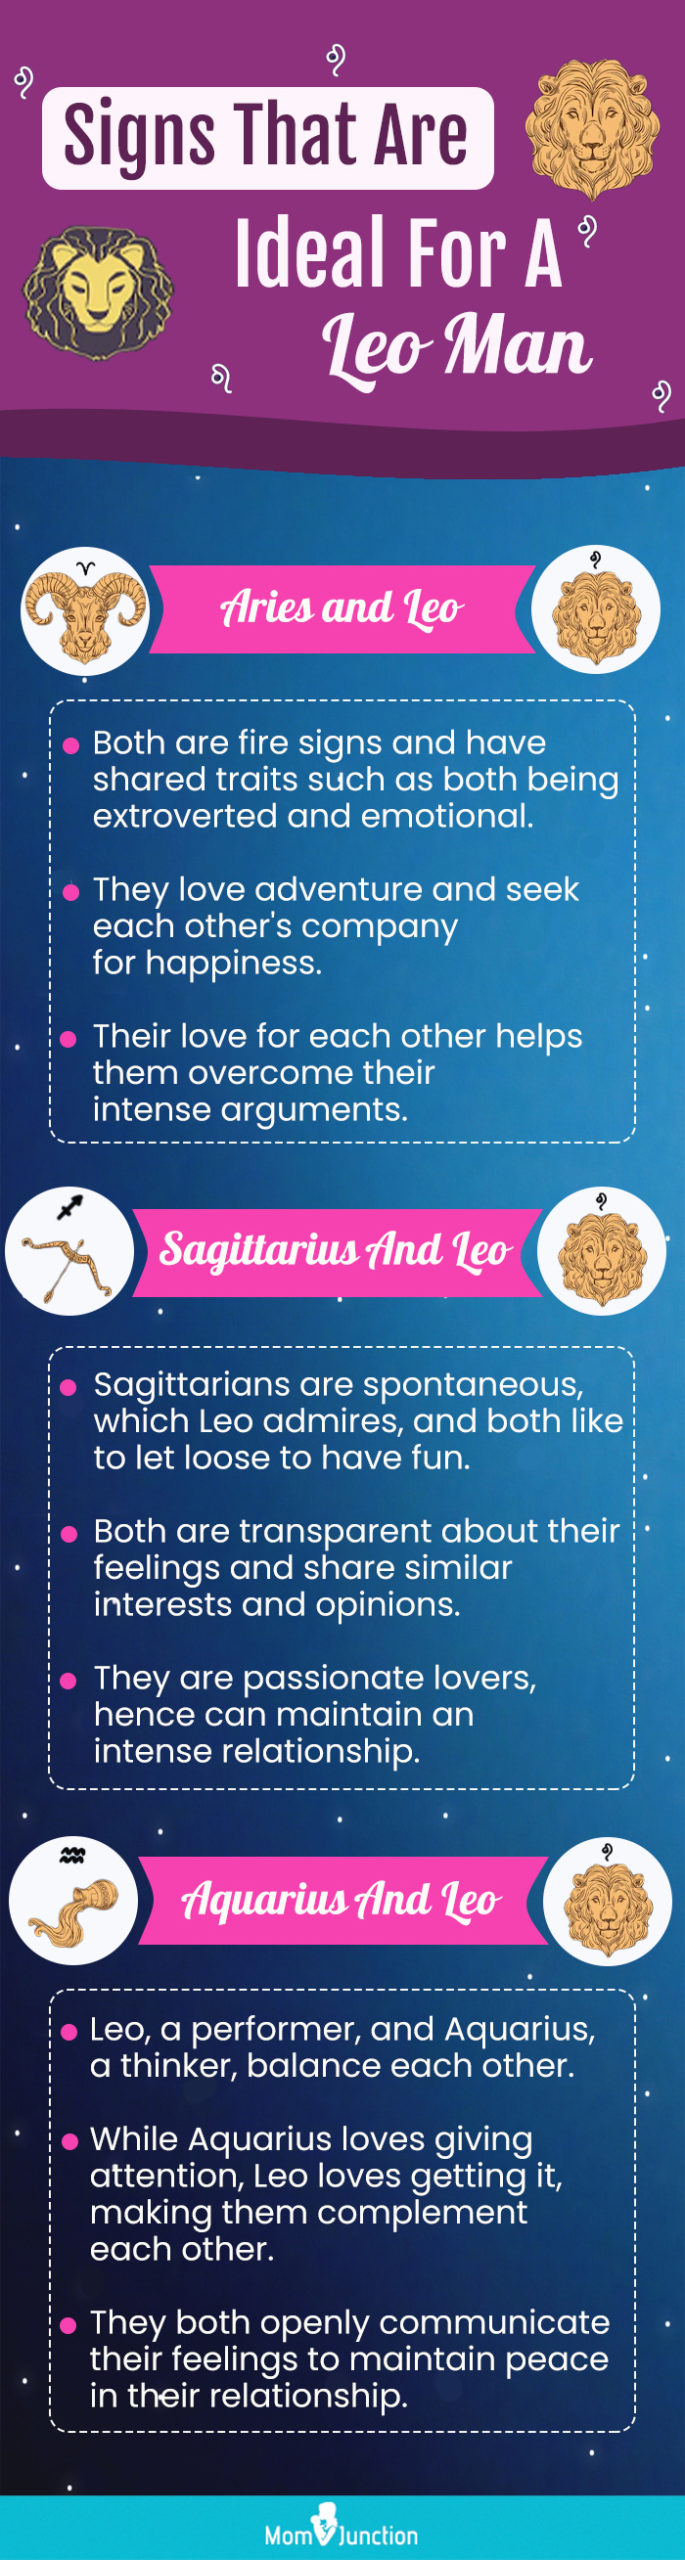 signs that are ideal for a leo man [infographic]